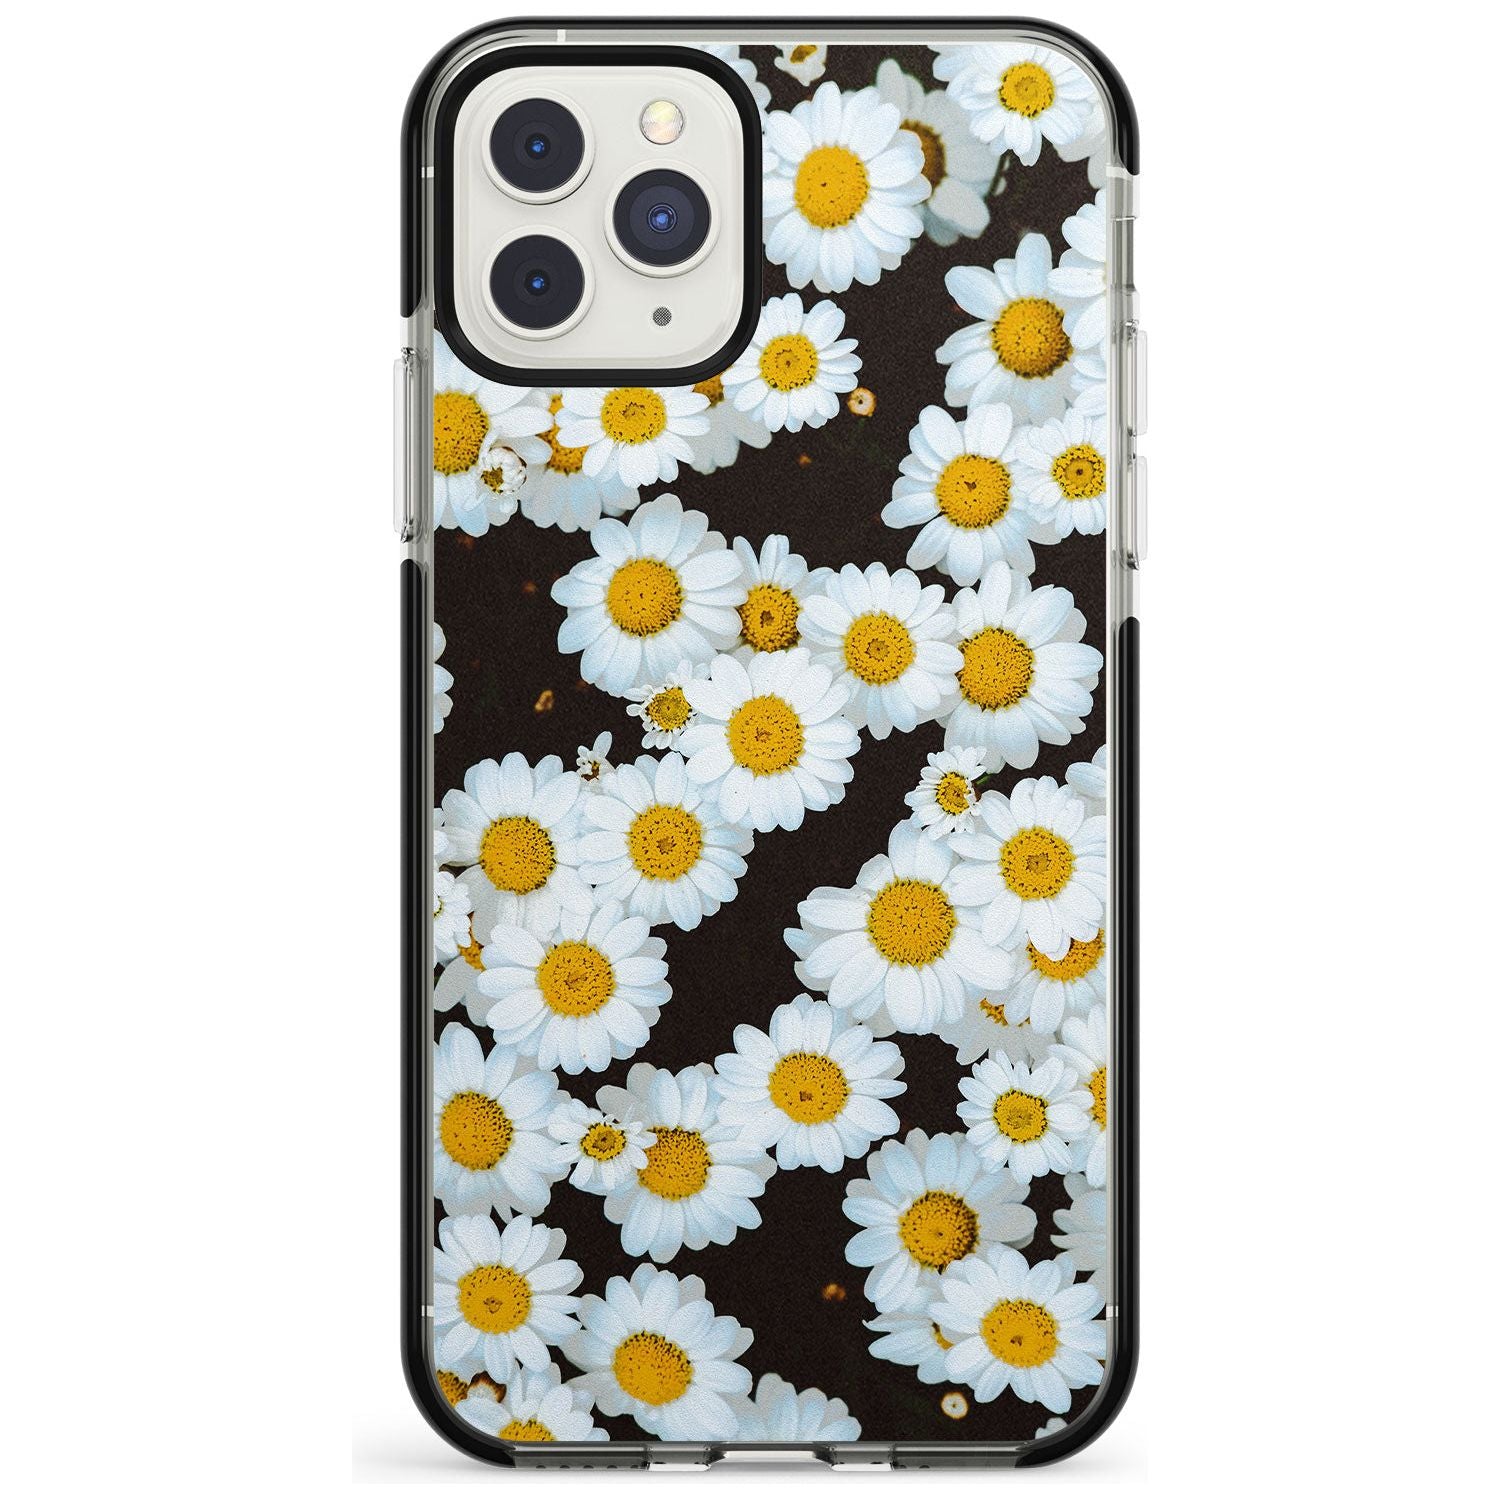 Daisies - Real Floral Photographs iPhone Case  Black Impact Phone Case - Case Warehouse